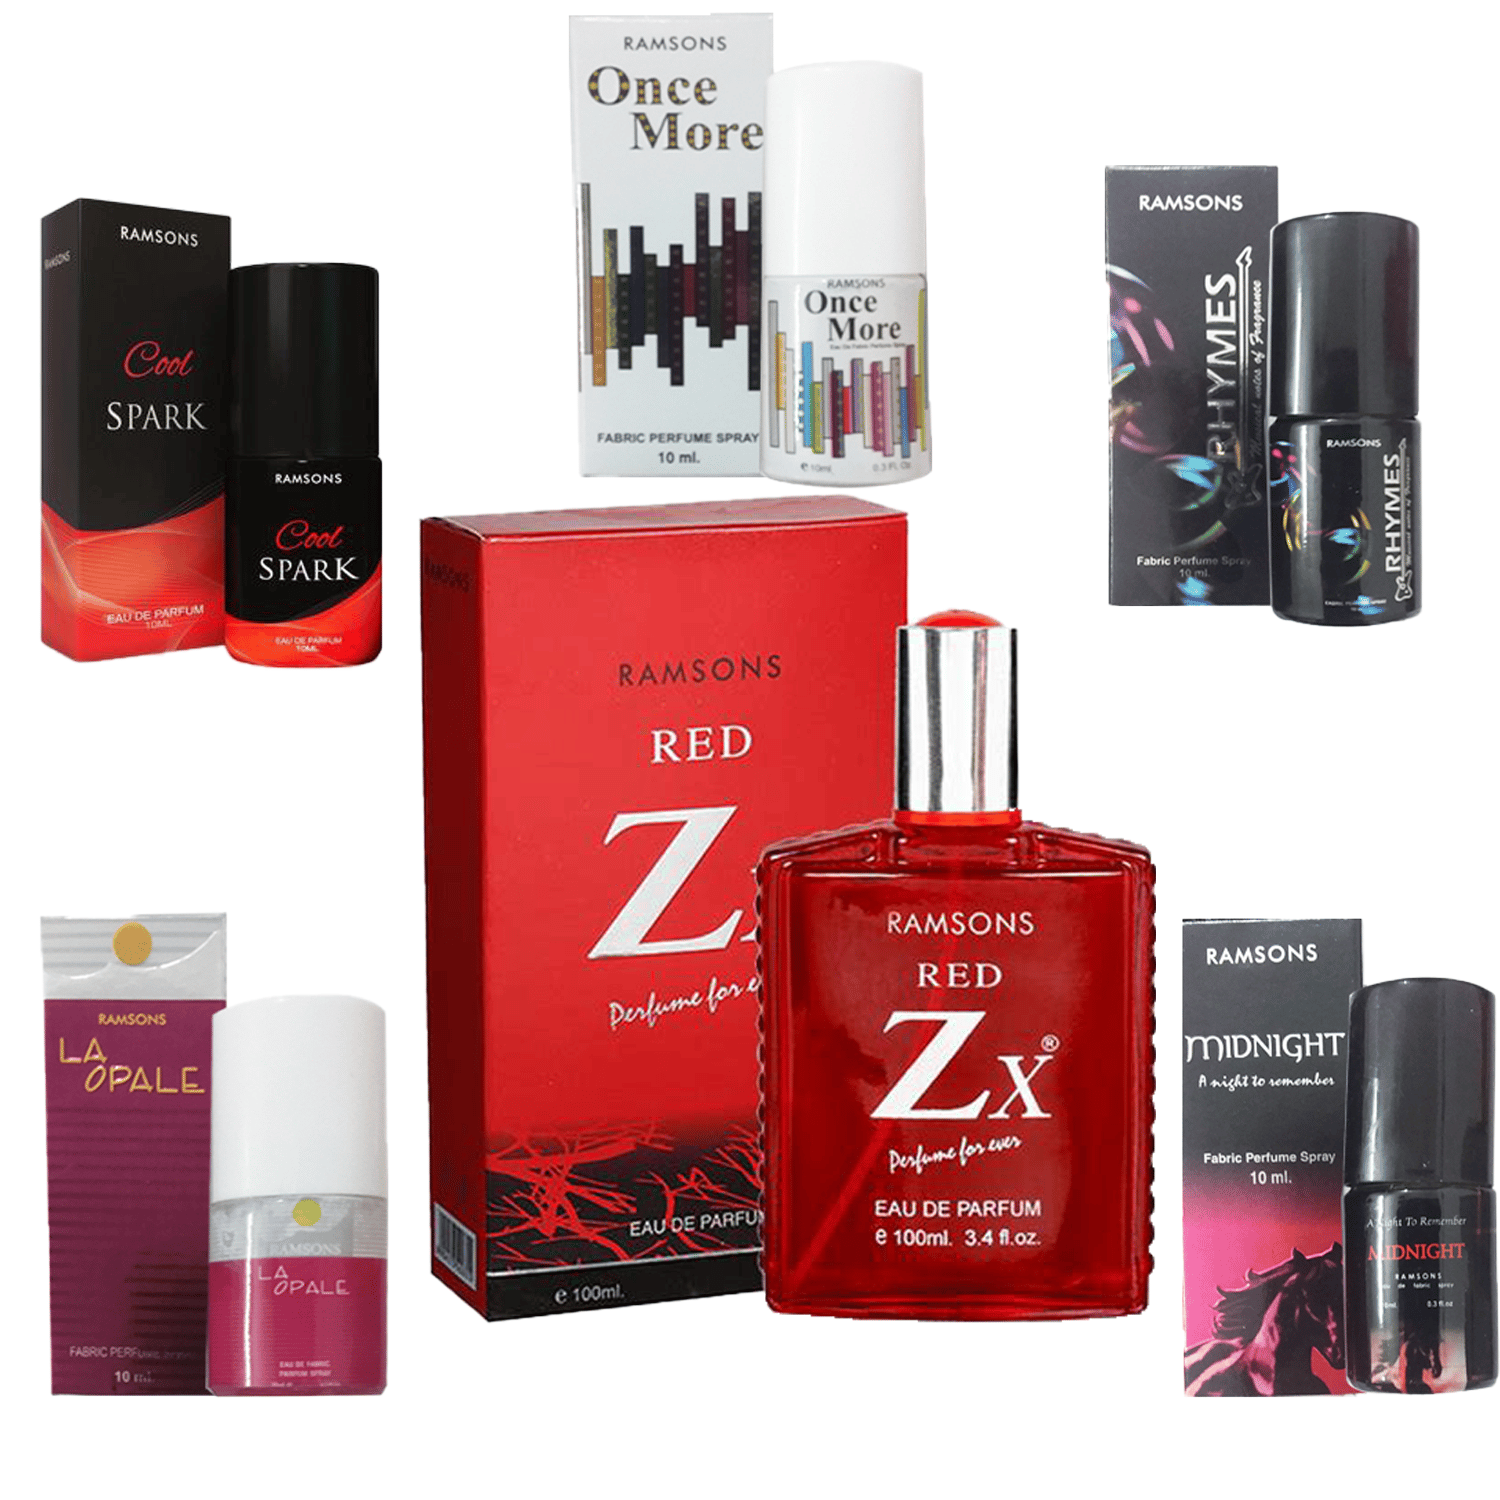 1 RAMSONS RED ZX PERFUME 100 ML+1 RAMSONS ONCE MORE PERFUME 10 ML+1 RAMSONS RHYMES PERFUME 10 ML+1 RAMSONS LA OPALE PERFUME 10 ML+1 RAMSONS MIDNIGHT PERFUME 10 ML+1 RAMSONS COOL SPARK PERFUME 10 ML